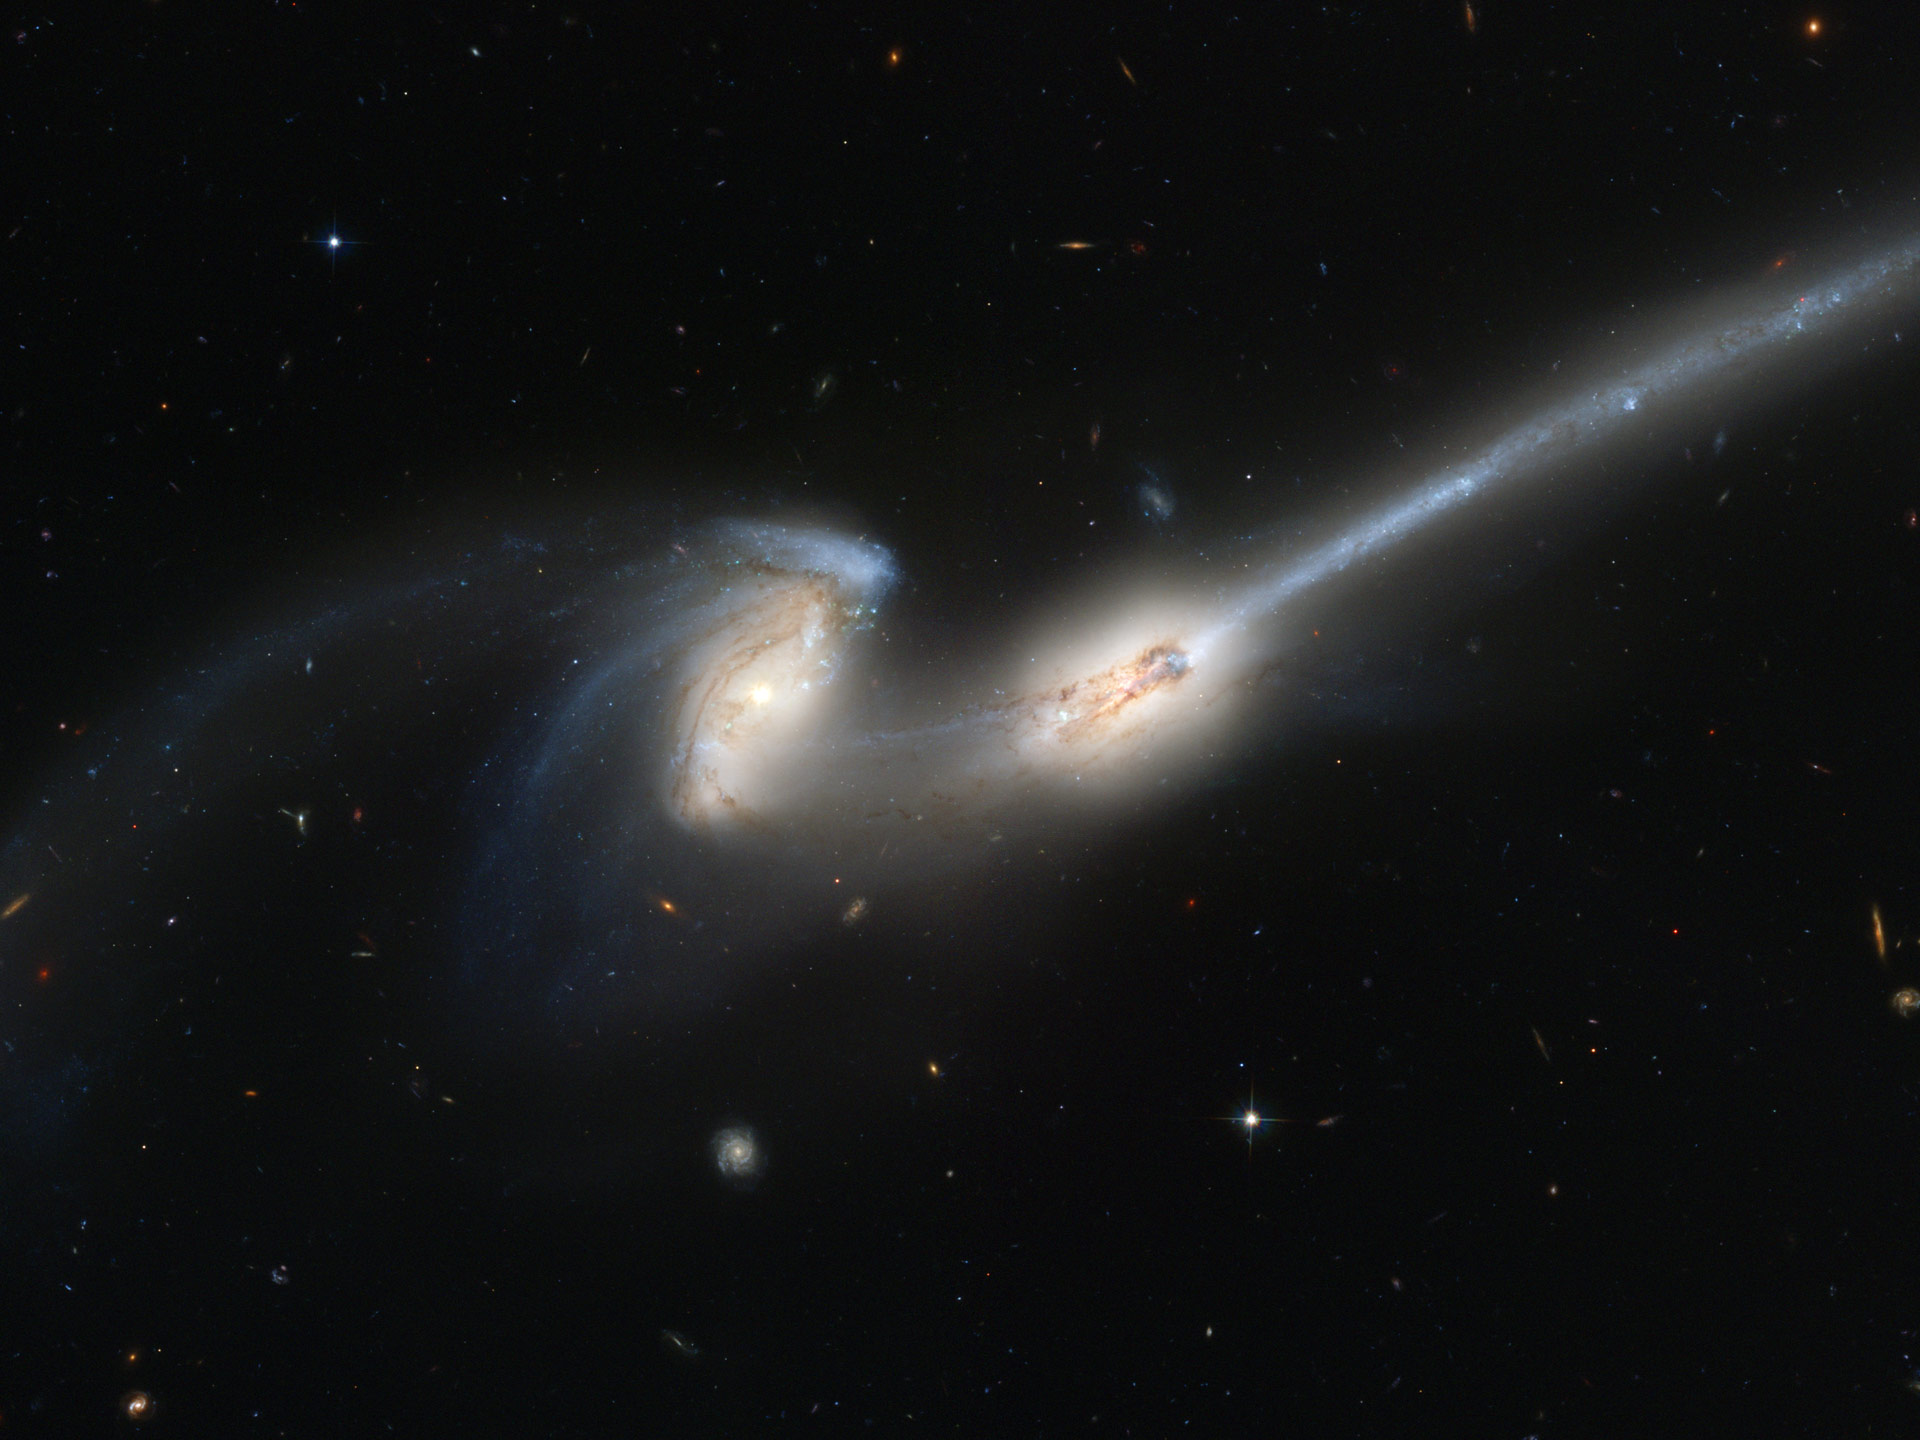 Hubble Image of the Day - Colliding Galaxies Nicknamed "The Mice"